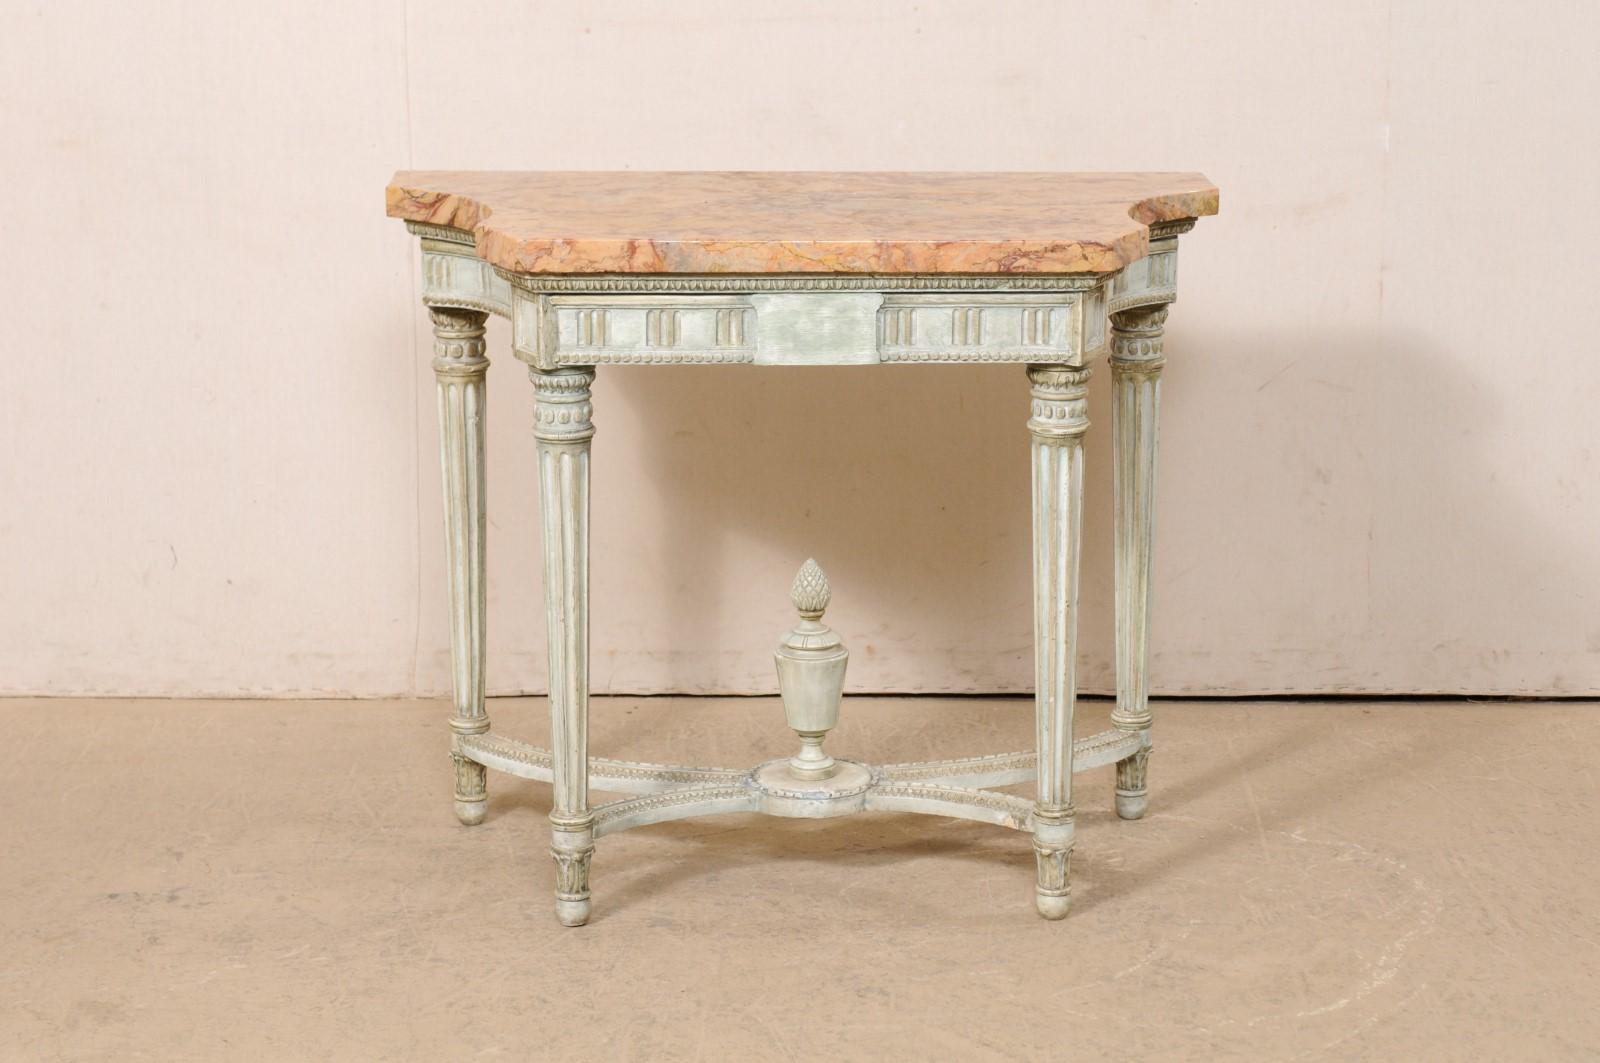 French Neoclassic Period Marble Top Console w/Carved Urn Finial at Underside For Sale 6